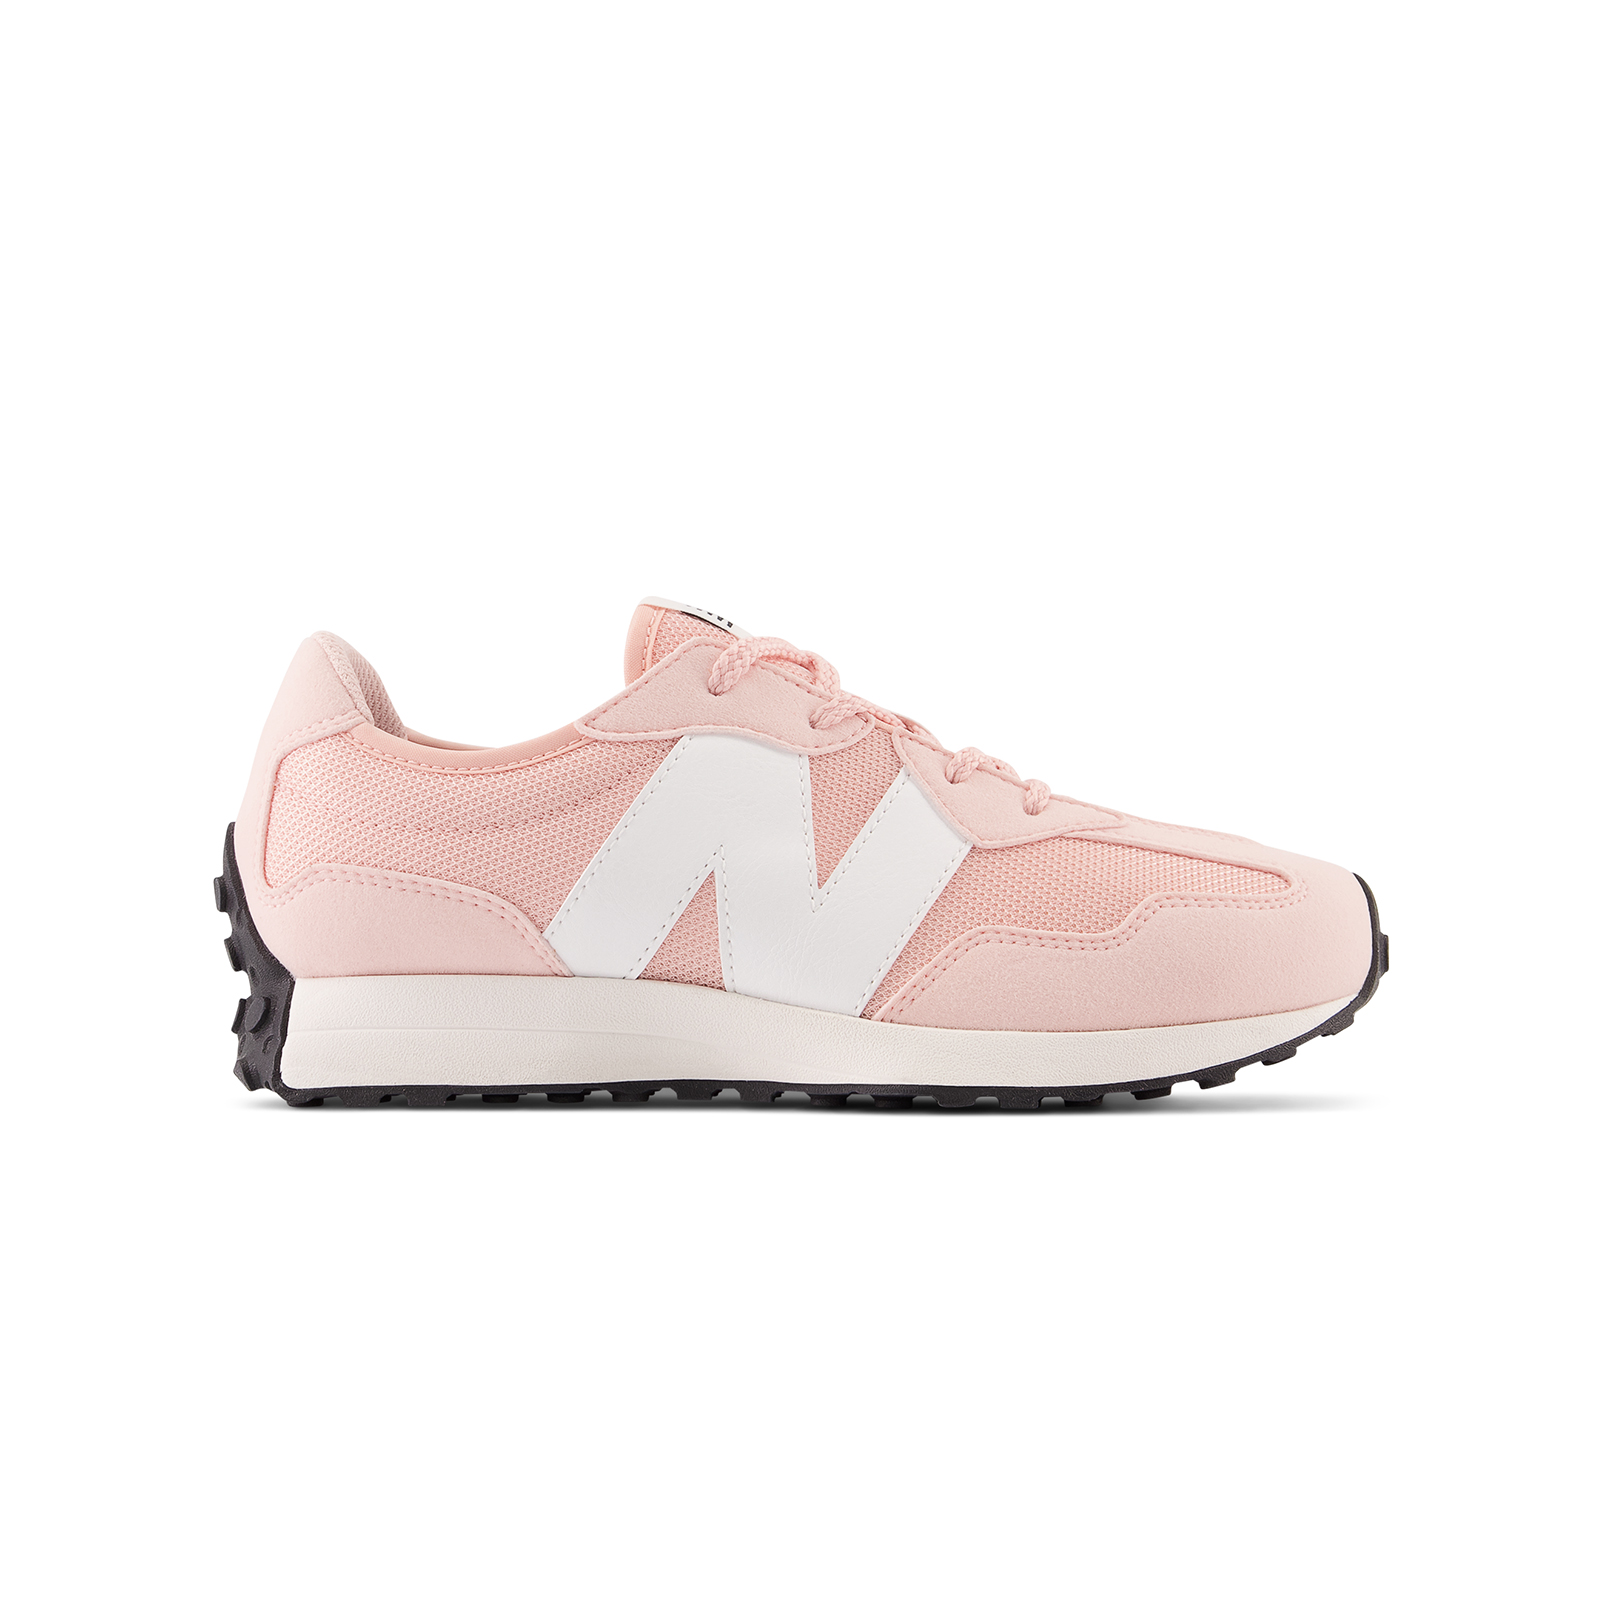 New balance ls - SHOES CLASSIC RUNNING - PINK HAZE Παιδικά > Παπούτσια > Sneaker > Παπούτσι Low Cut